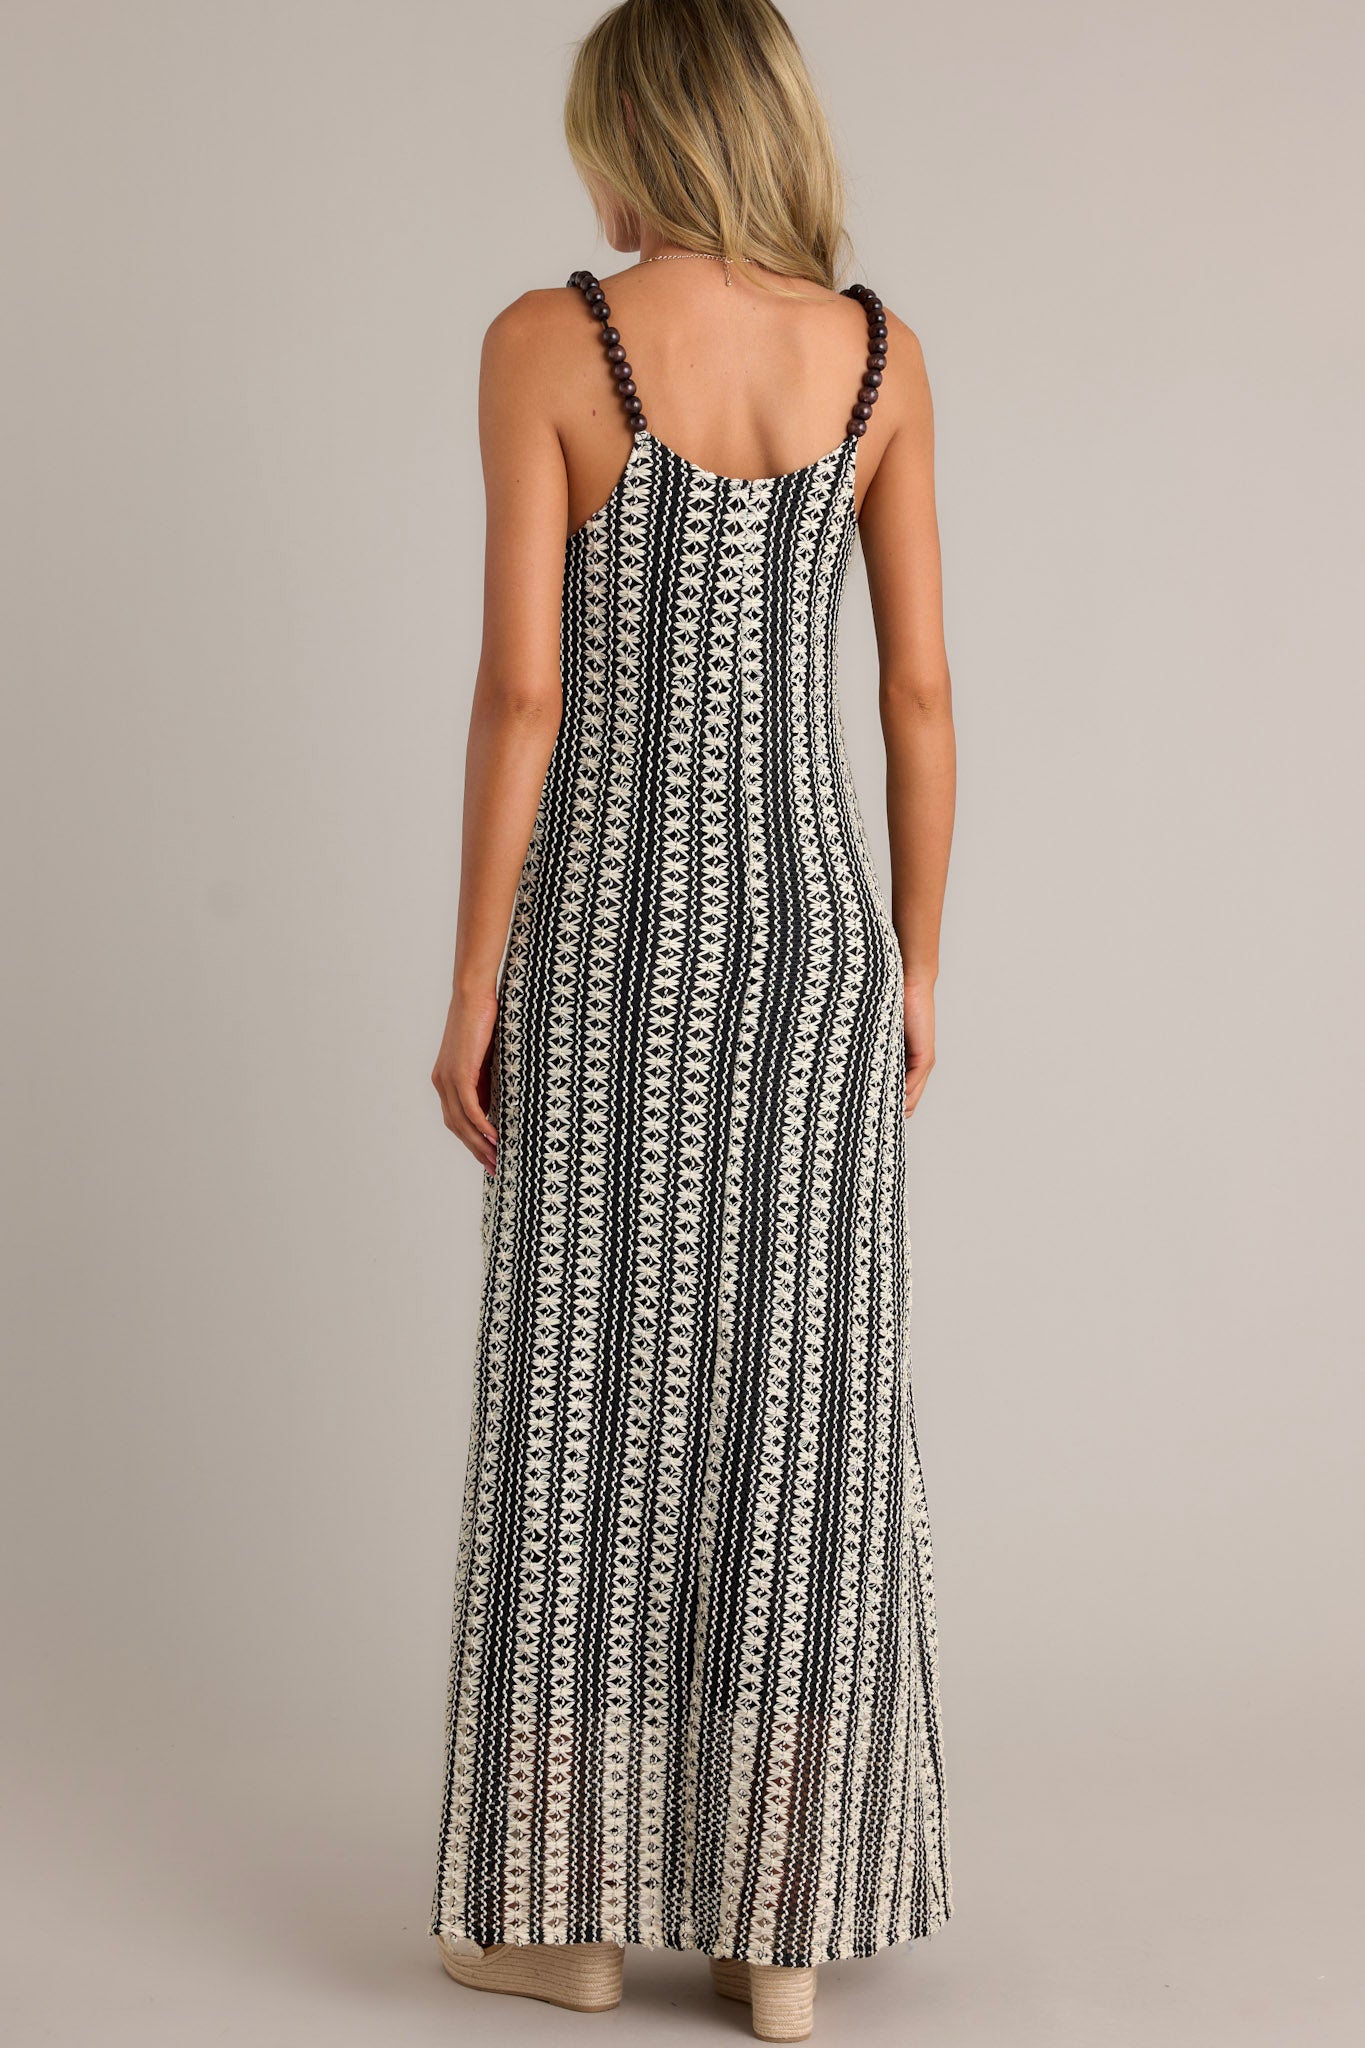 Back view of a black stripe maxi dress highlighting the fully beaded straps, knitted design, and overall fit.